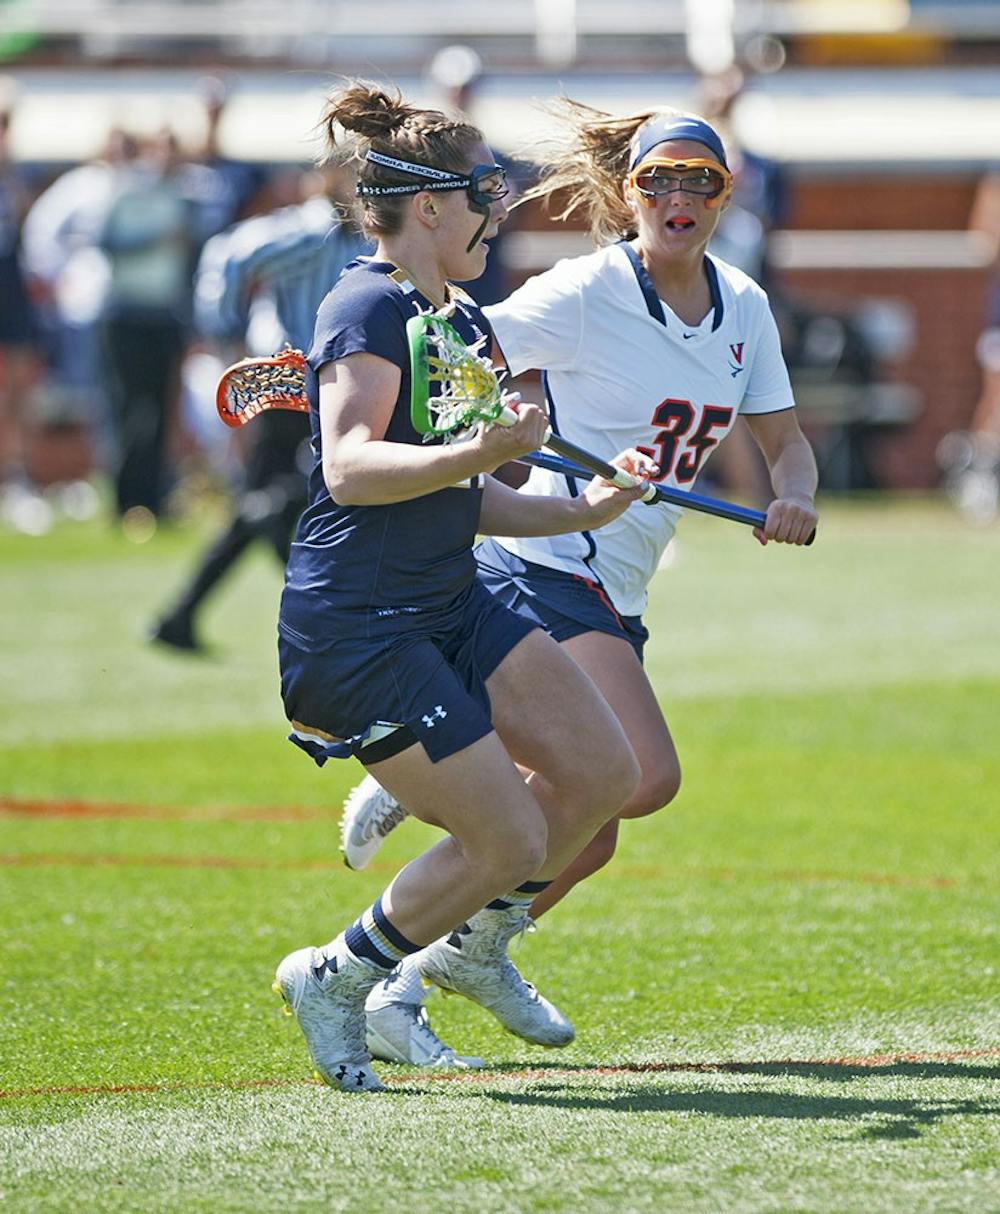 <p>Senior attacker Kelly Boyd and her twin sister, Brooke, have been playing lacrosse together since kindergarden. The decision to attend Virginia together was an easy one for both.</p>